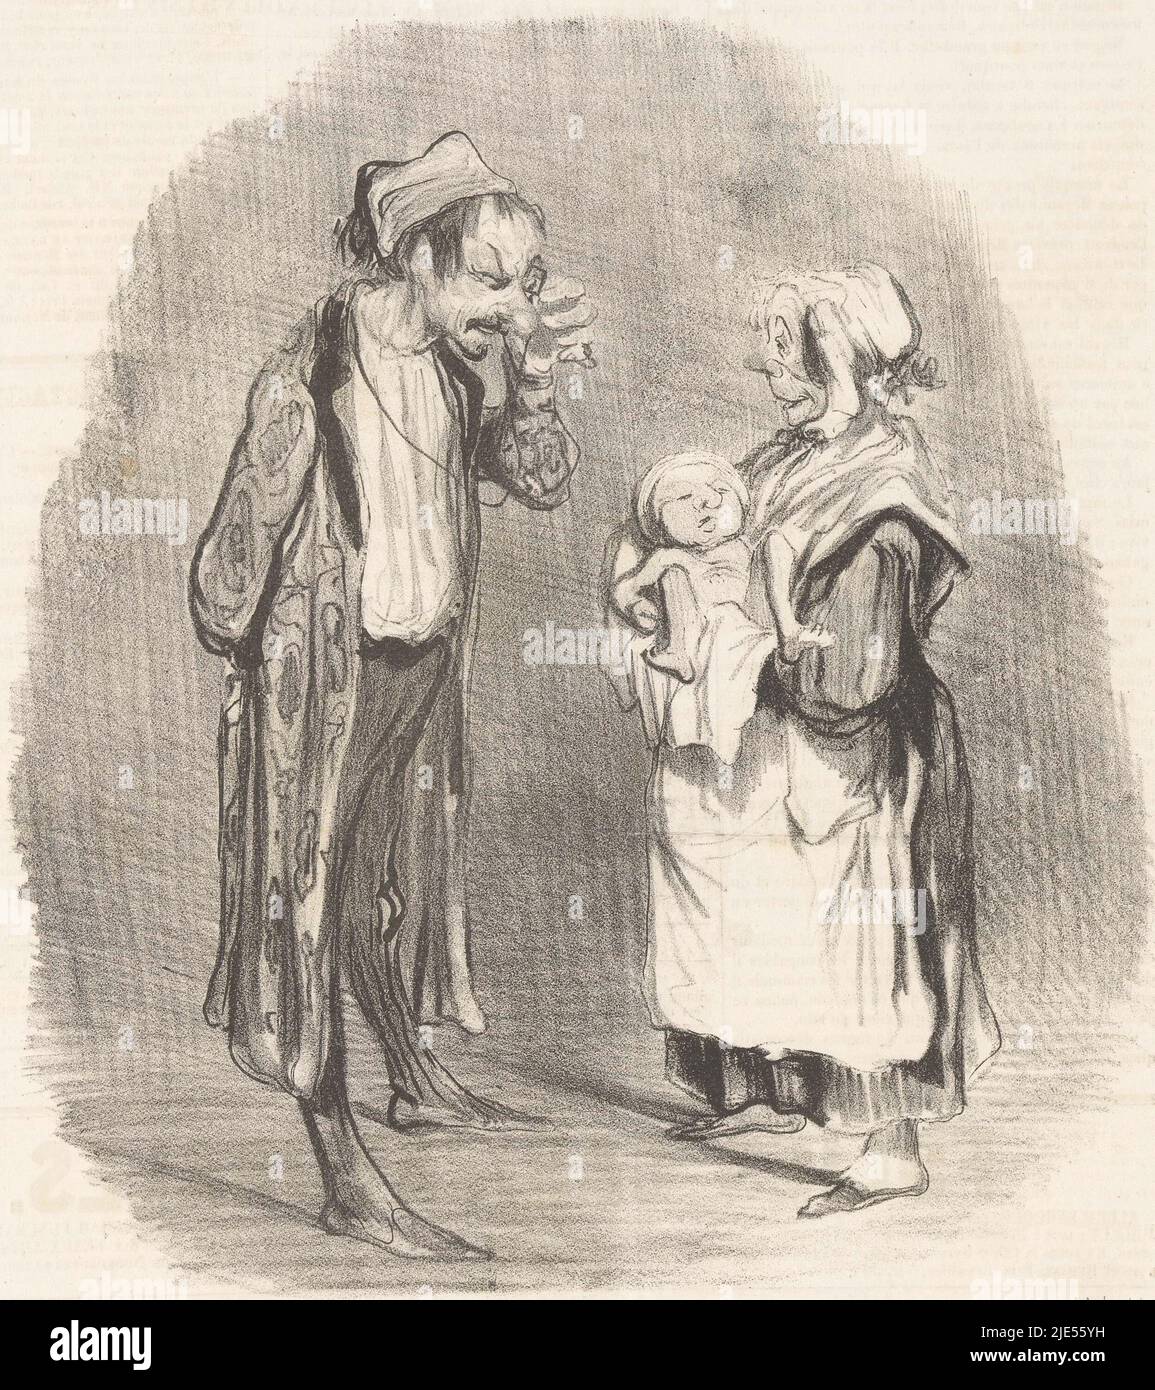 Midwife shows a man his first-born child Le premier-né, Family situations (series title) Moeurs conjugales (series title on object), print maker: Honoré Daumier, (mentioned on object), printer: Aubert & Cie., (mentioned on object), publisher: Bauger, (mentioned on object), Paris, 1840, paper, letterpress printing, h 363 mm × w 246 mm Stock Photo